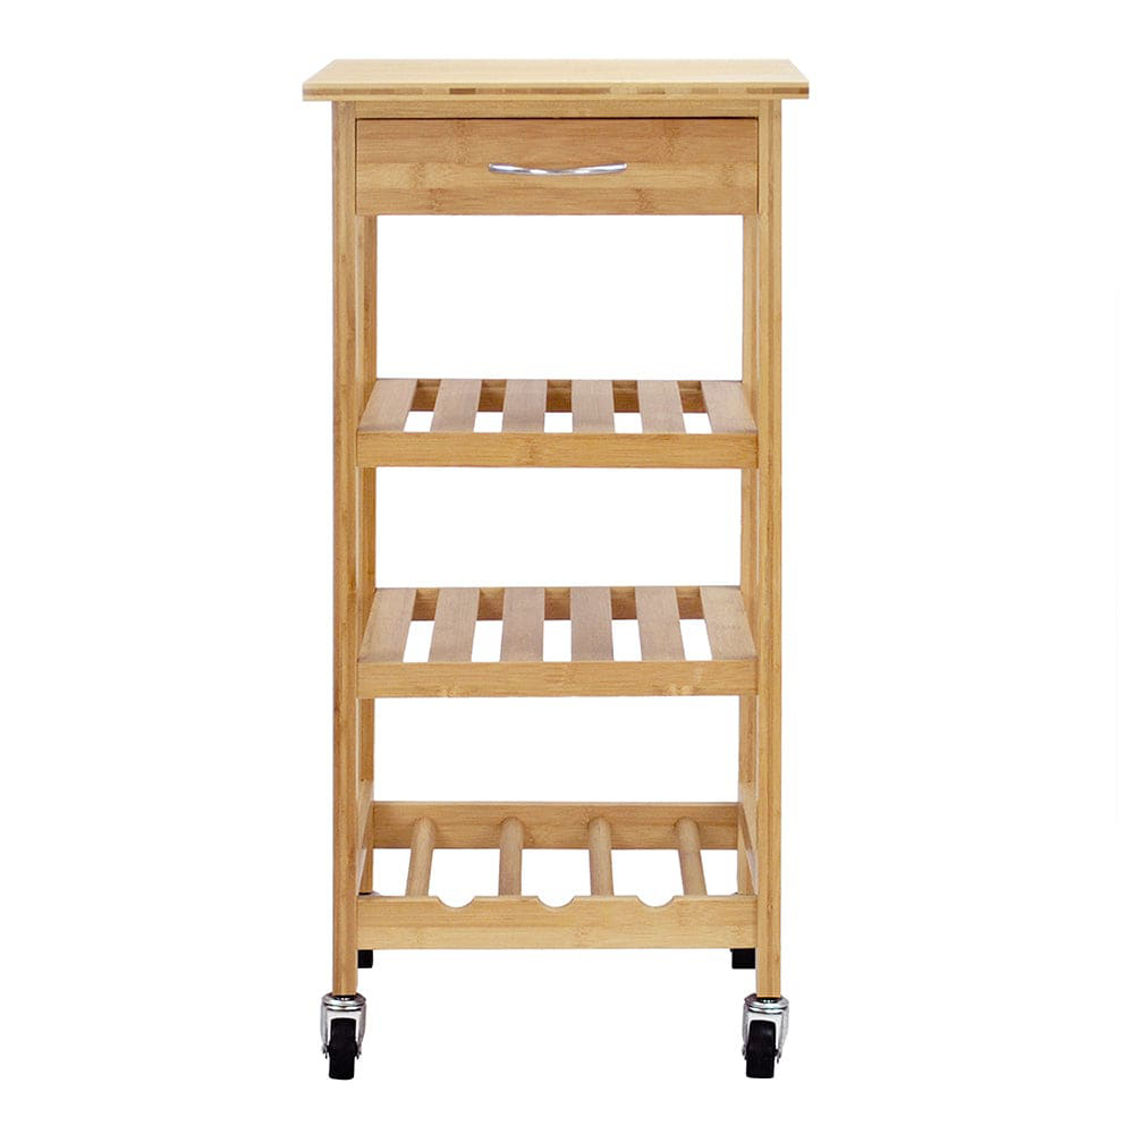 Oceanstar Bamboo Kitchen Trolley - Image 5 of 5